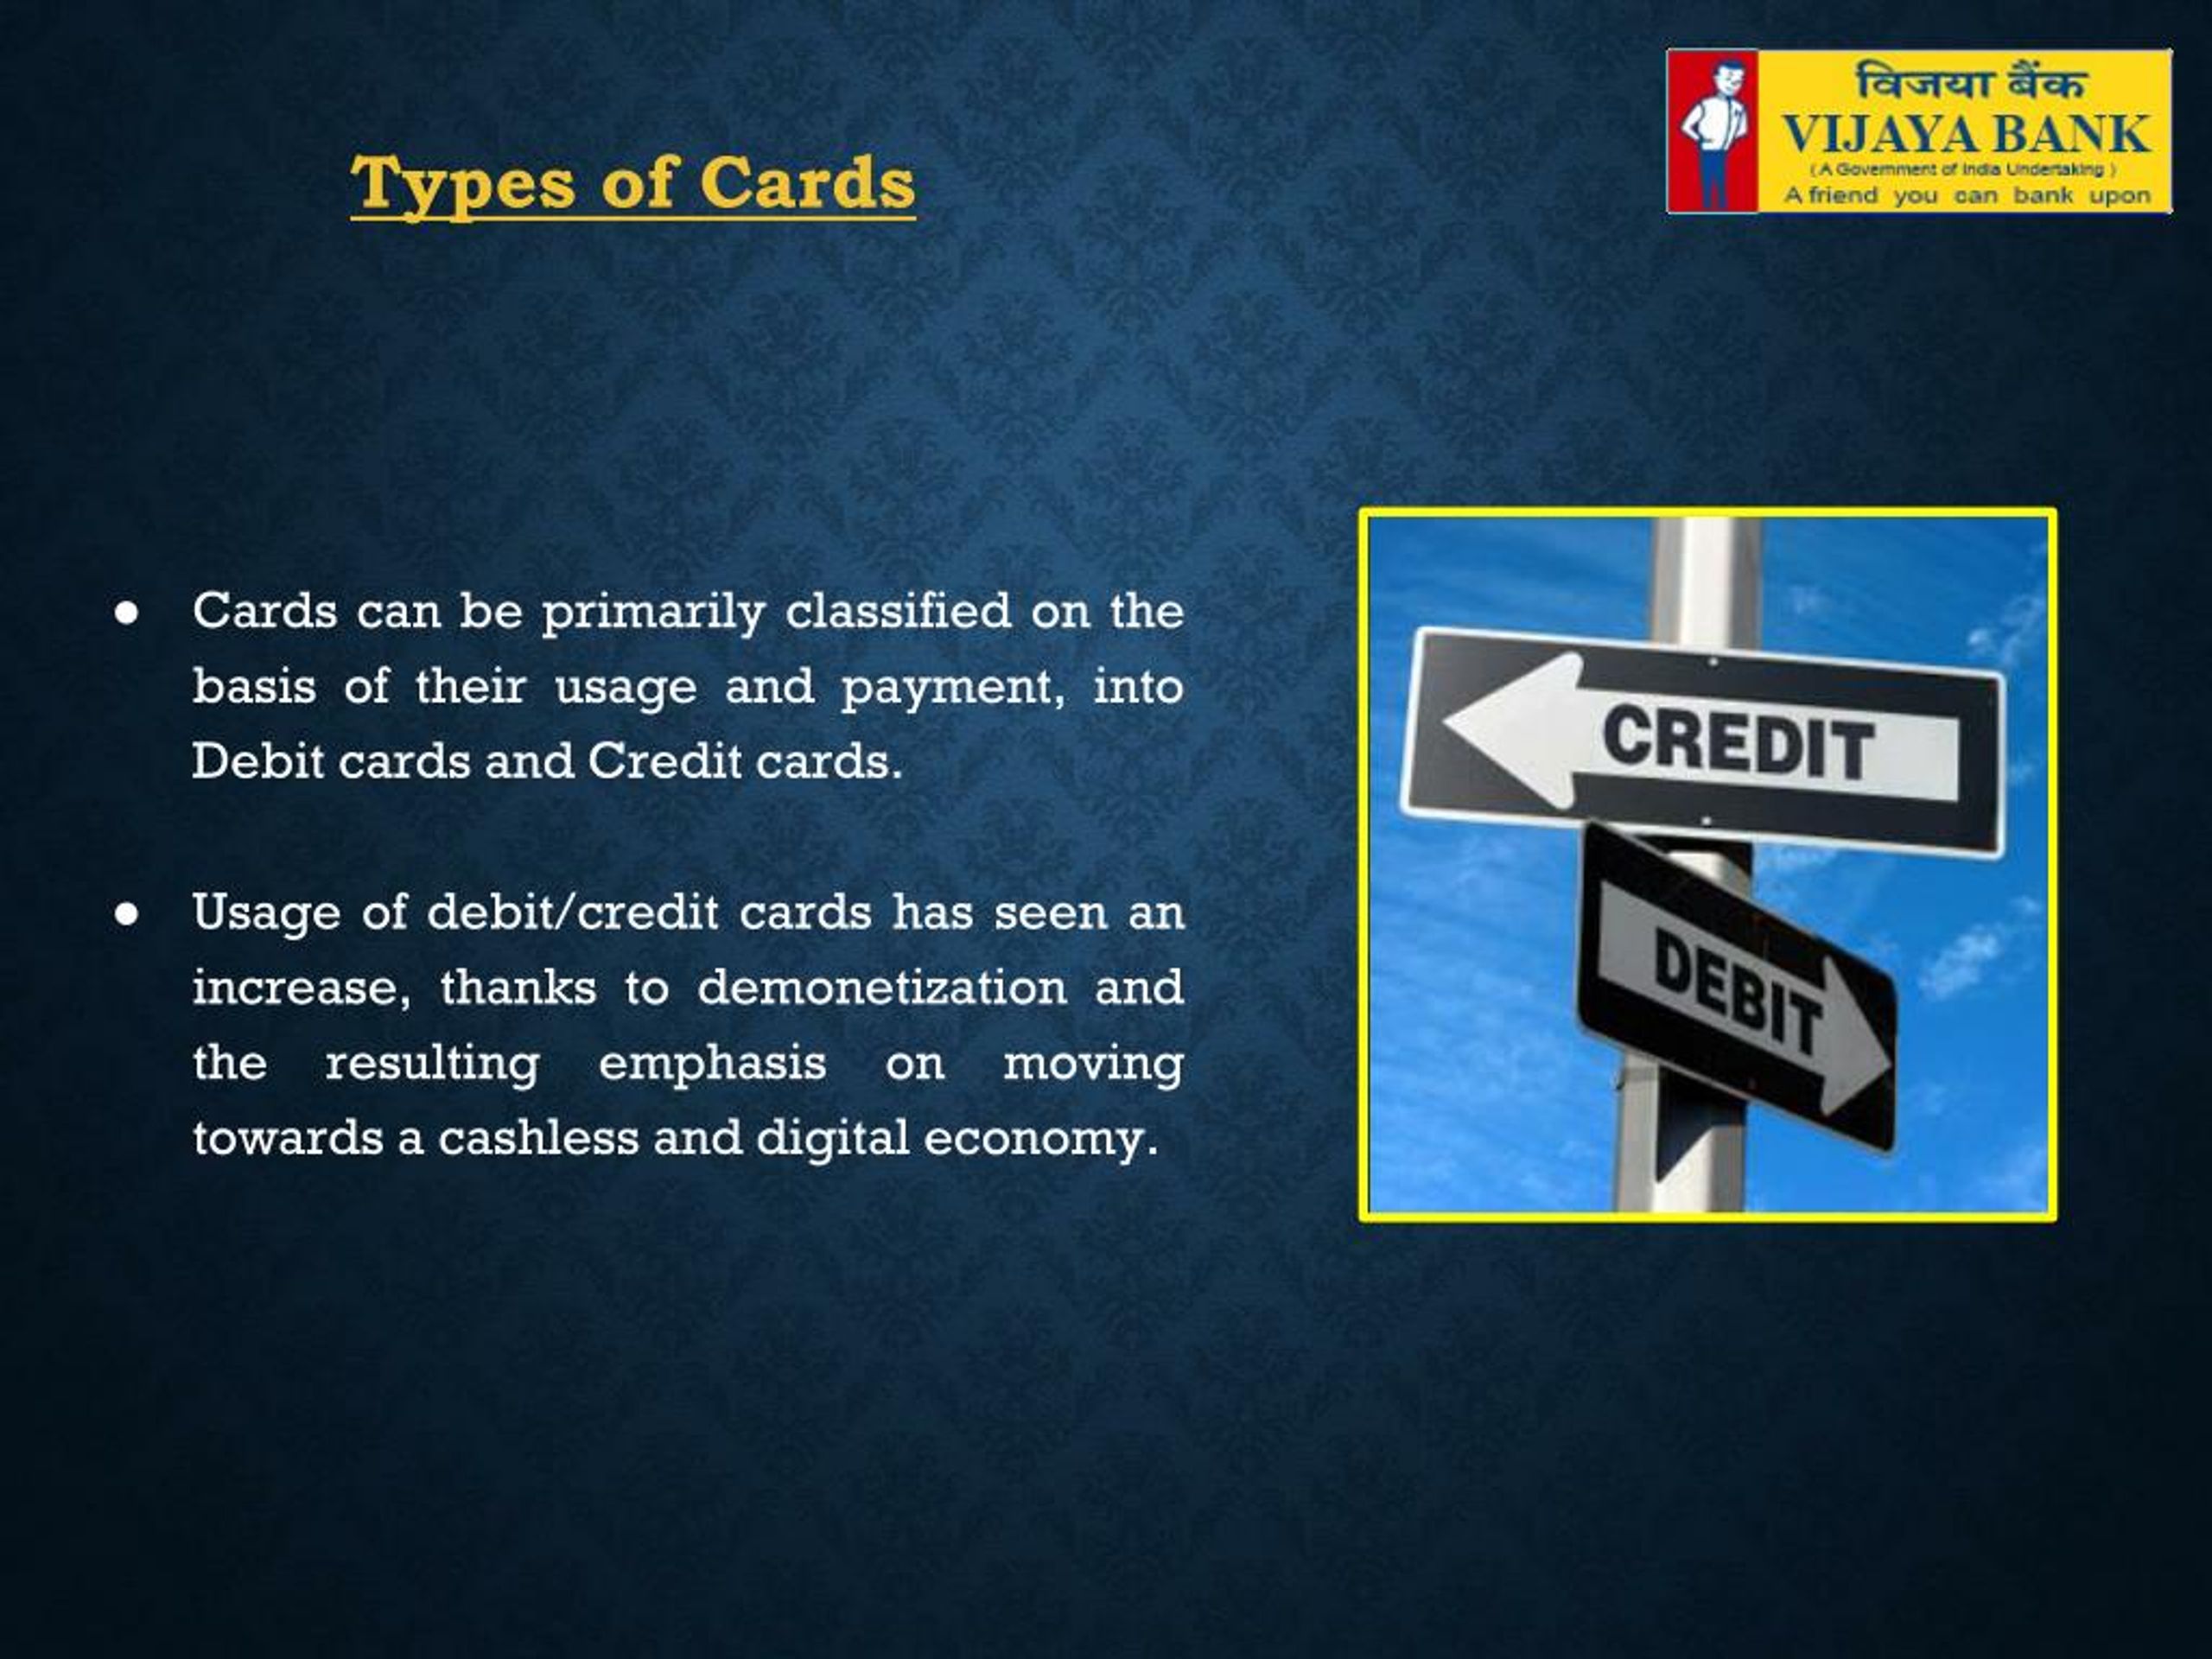 PPT - Card Services Offered by Vijaya Bank PowerPoint Presentation, free download - ID:7596068